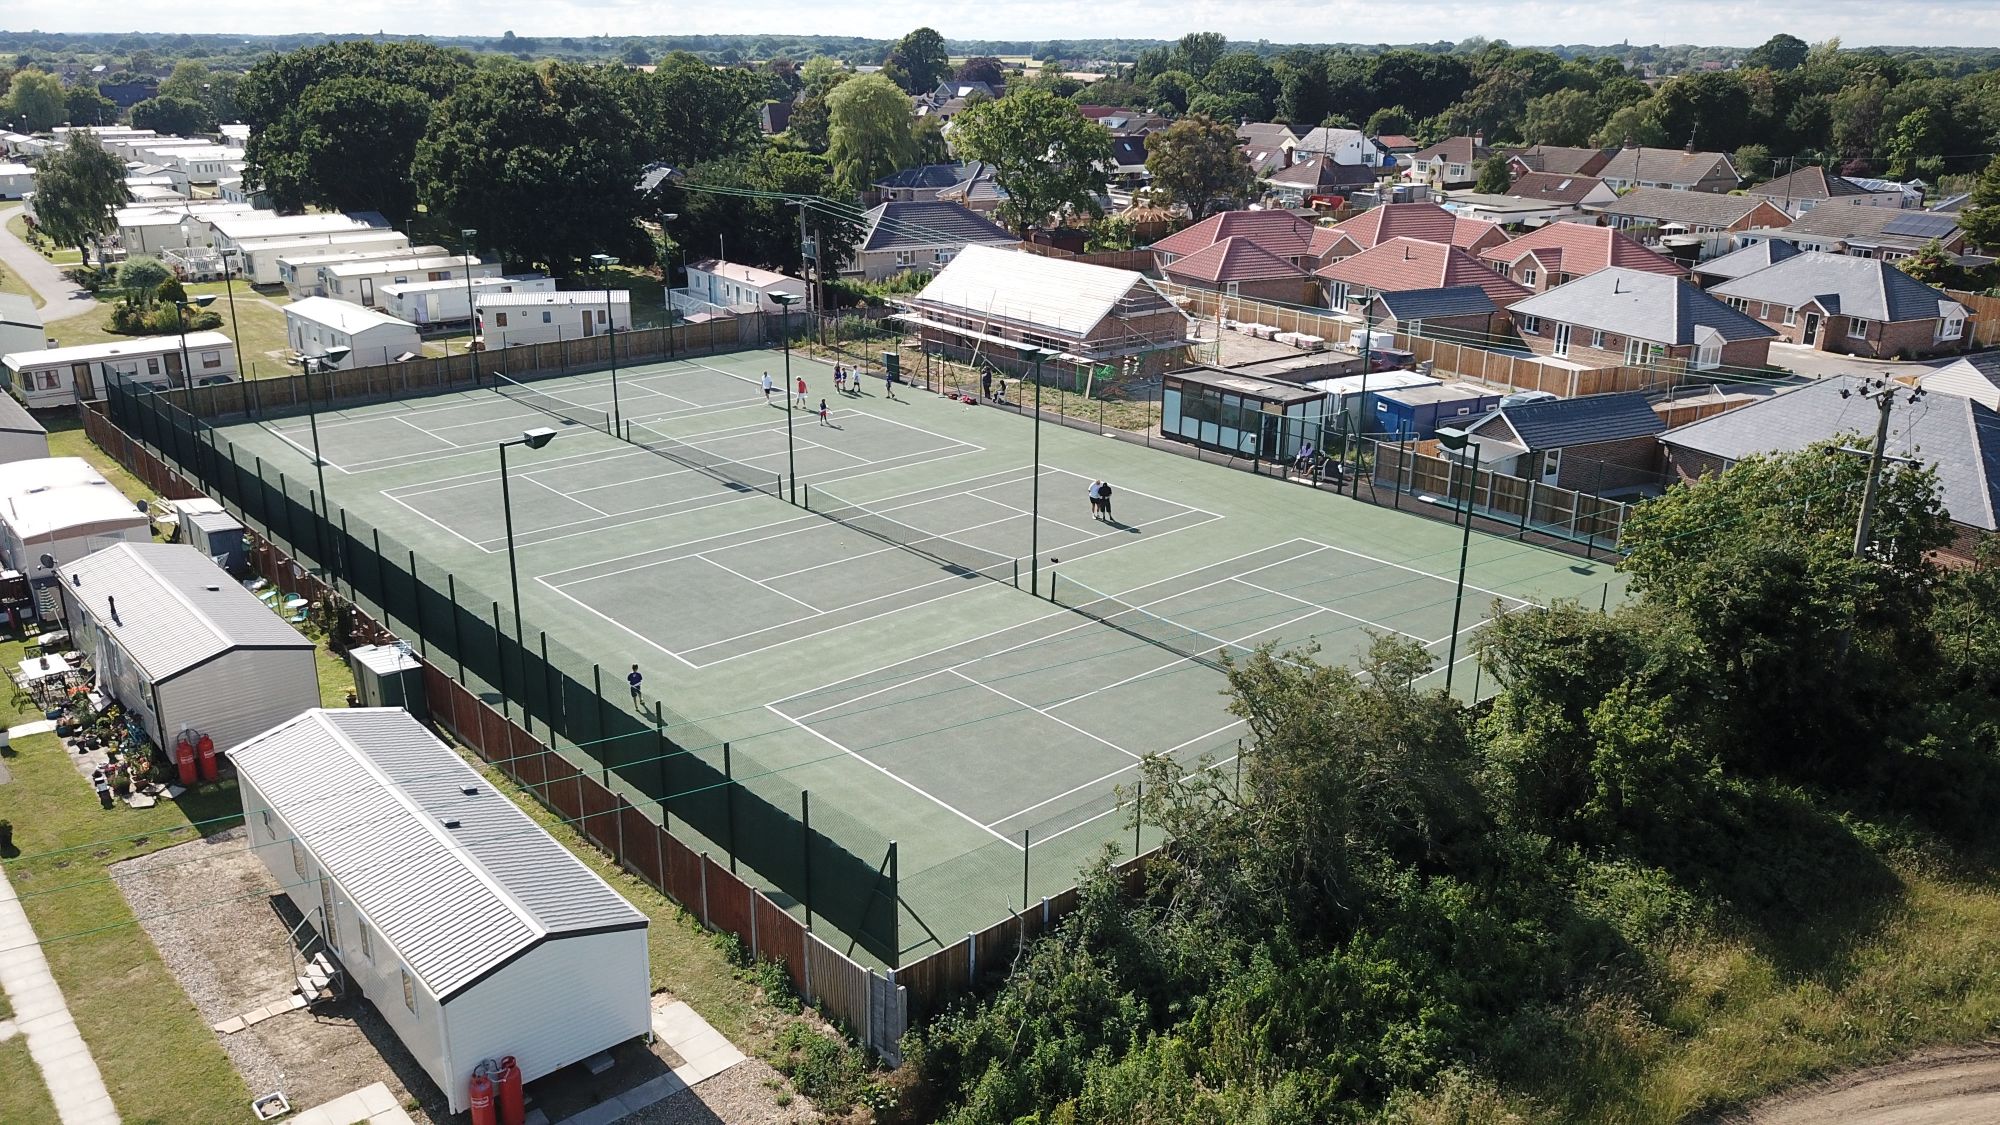 This major tennis club upgrade is leading the way with eco-friendly tennis court floodlights and a clubhouse powered by renewable energy